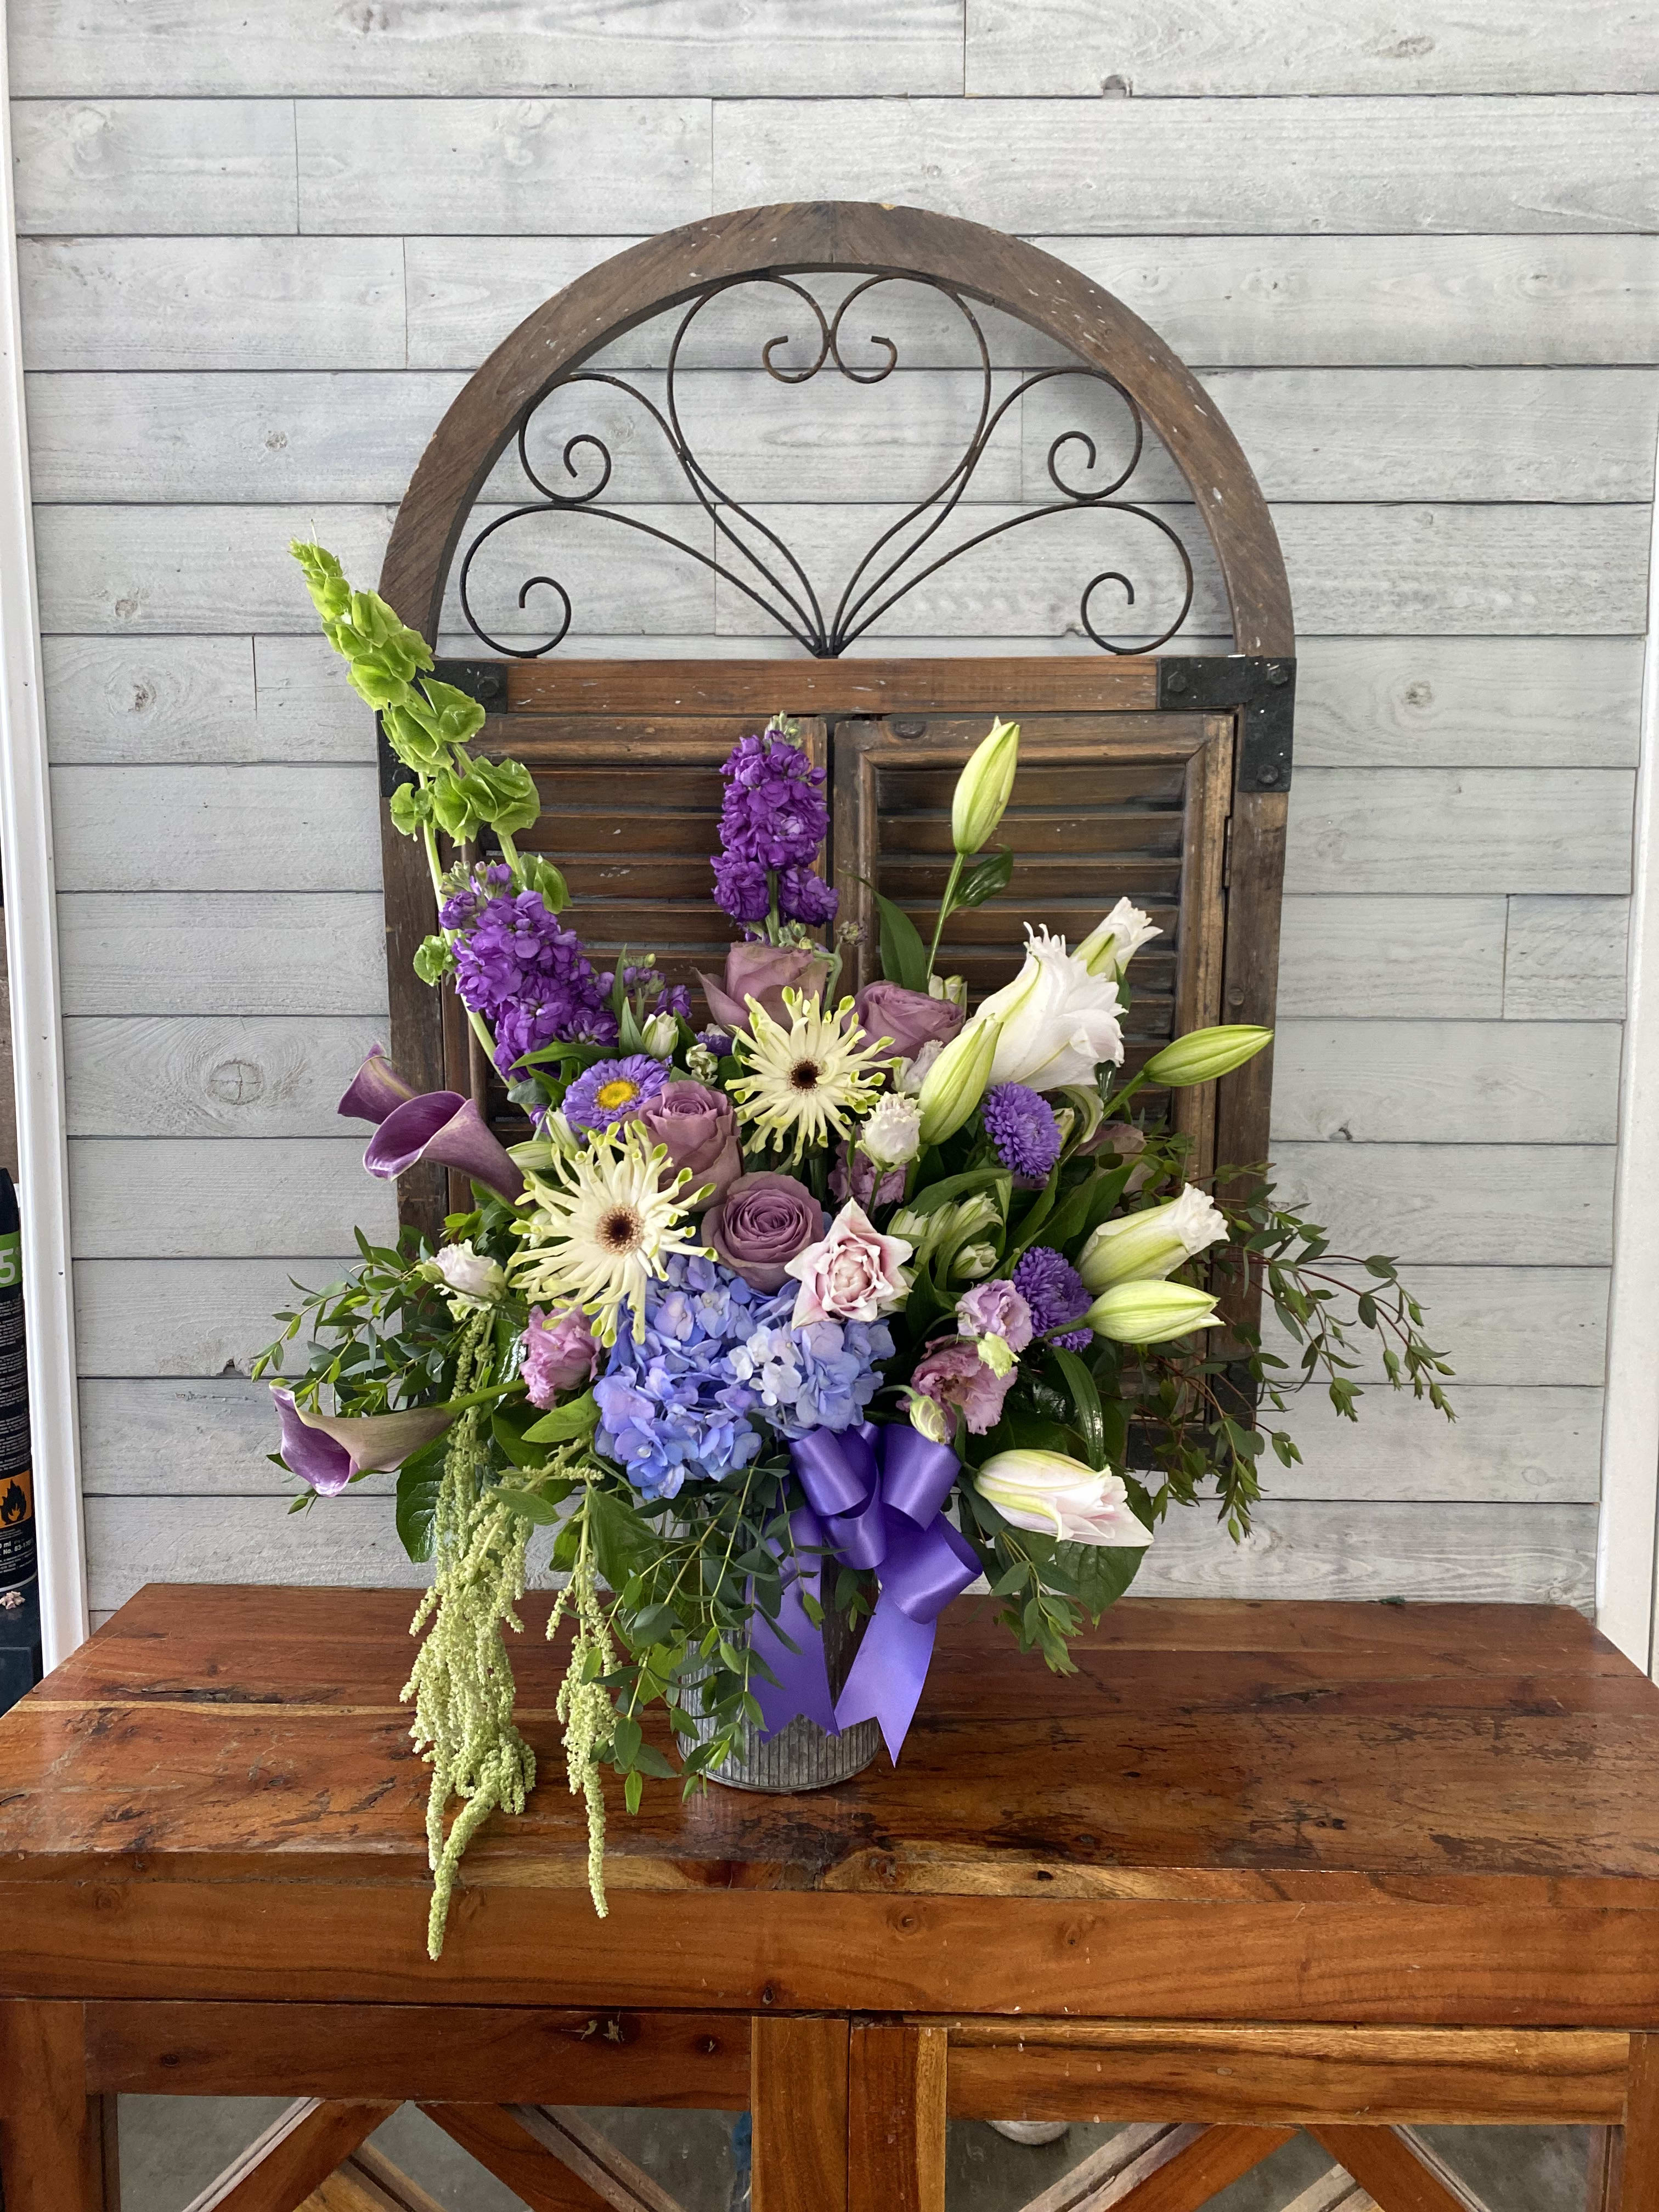 About happiness  - Lavender and purple flowers in a rustic container.